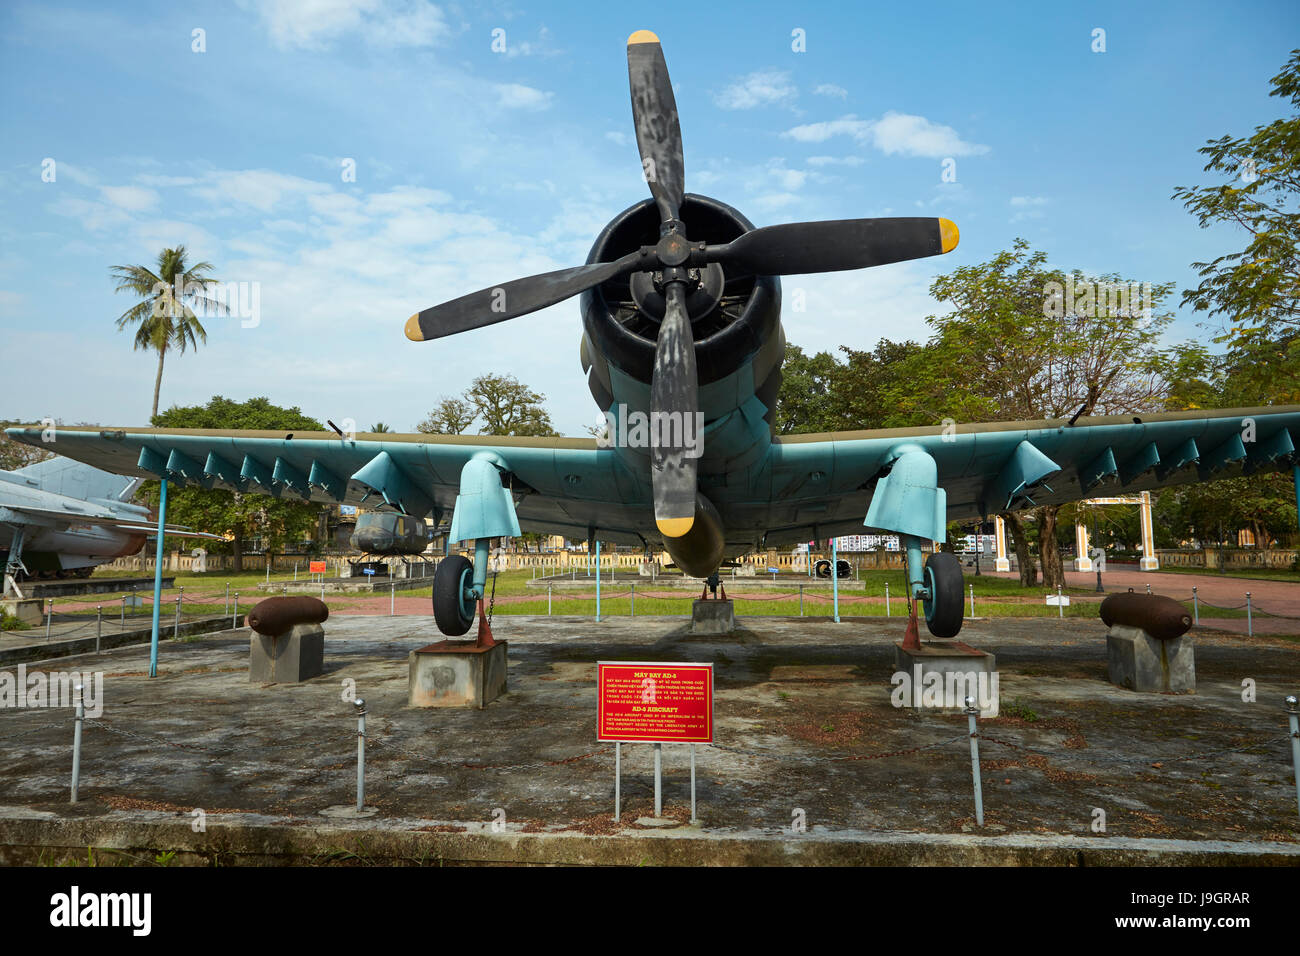 AD-6 American attack aircraft, Military Museum, Hue, Thua Thien-Hue Province, North Central Coast, Vietnam Stock Photo